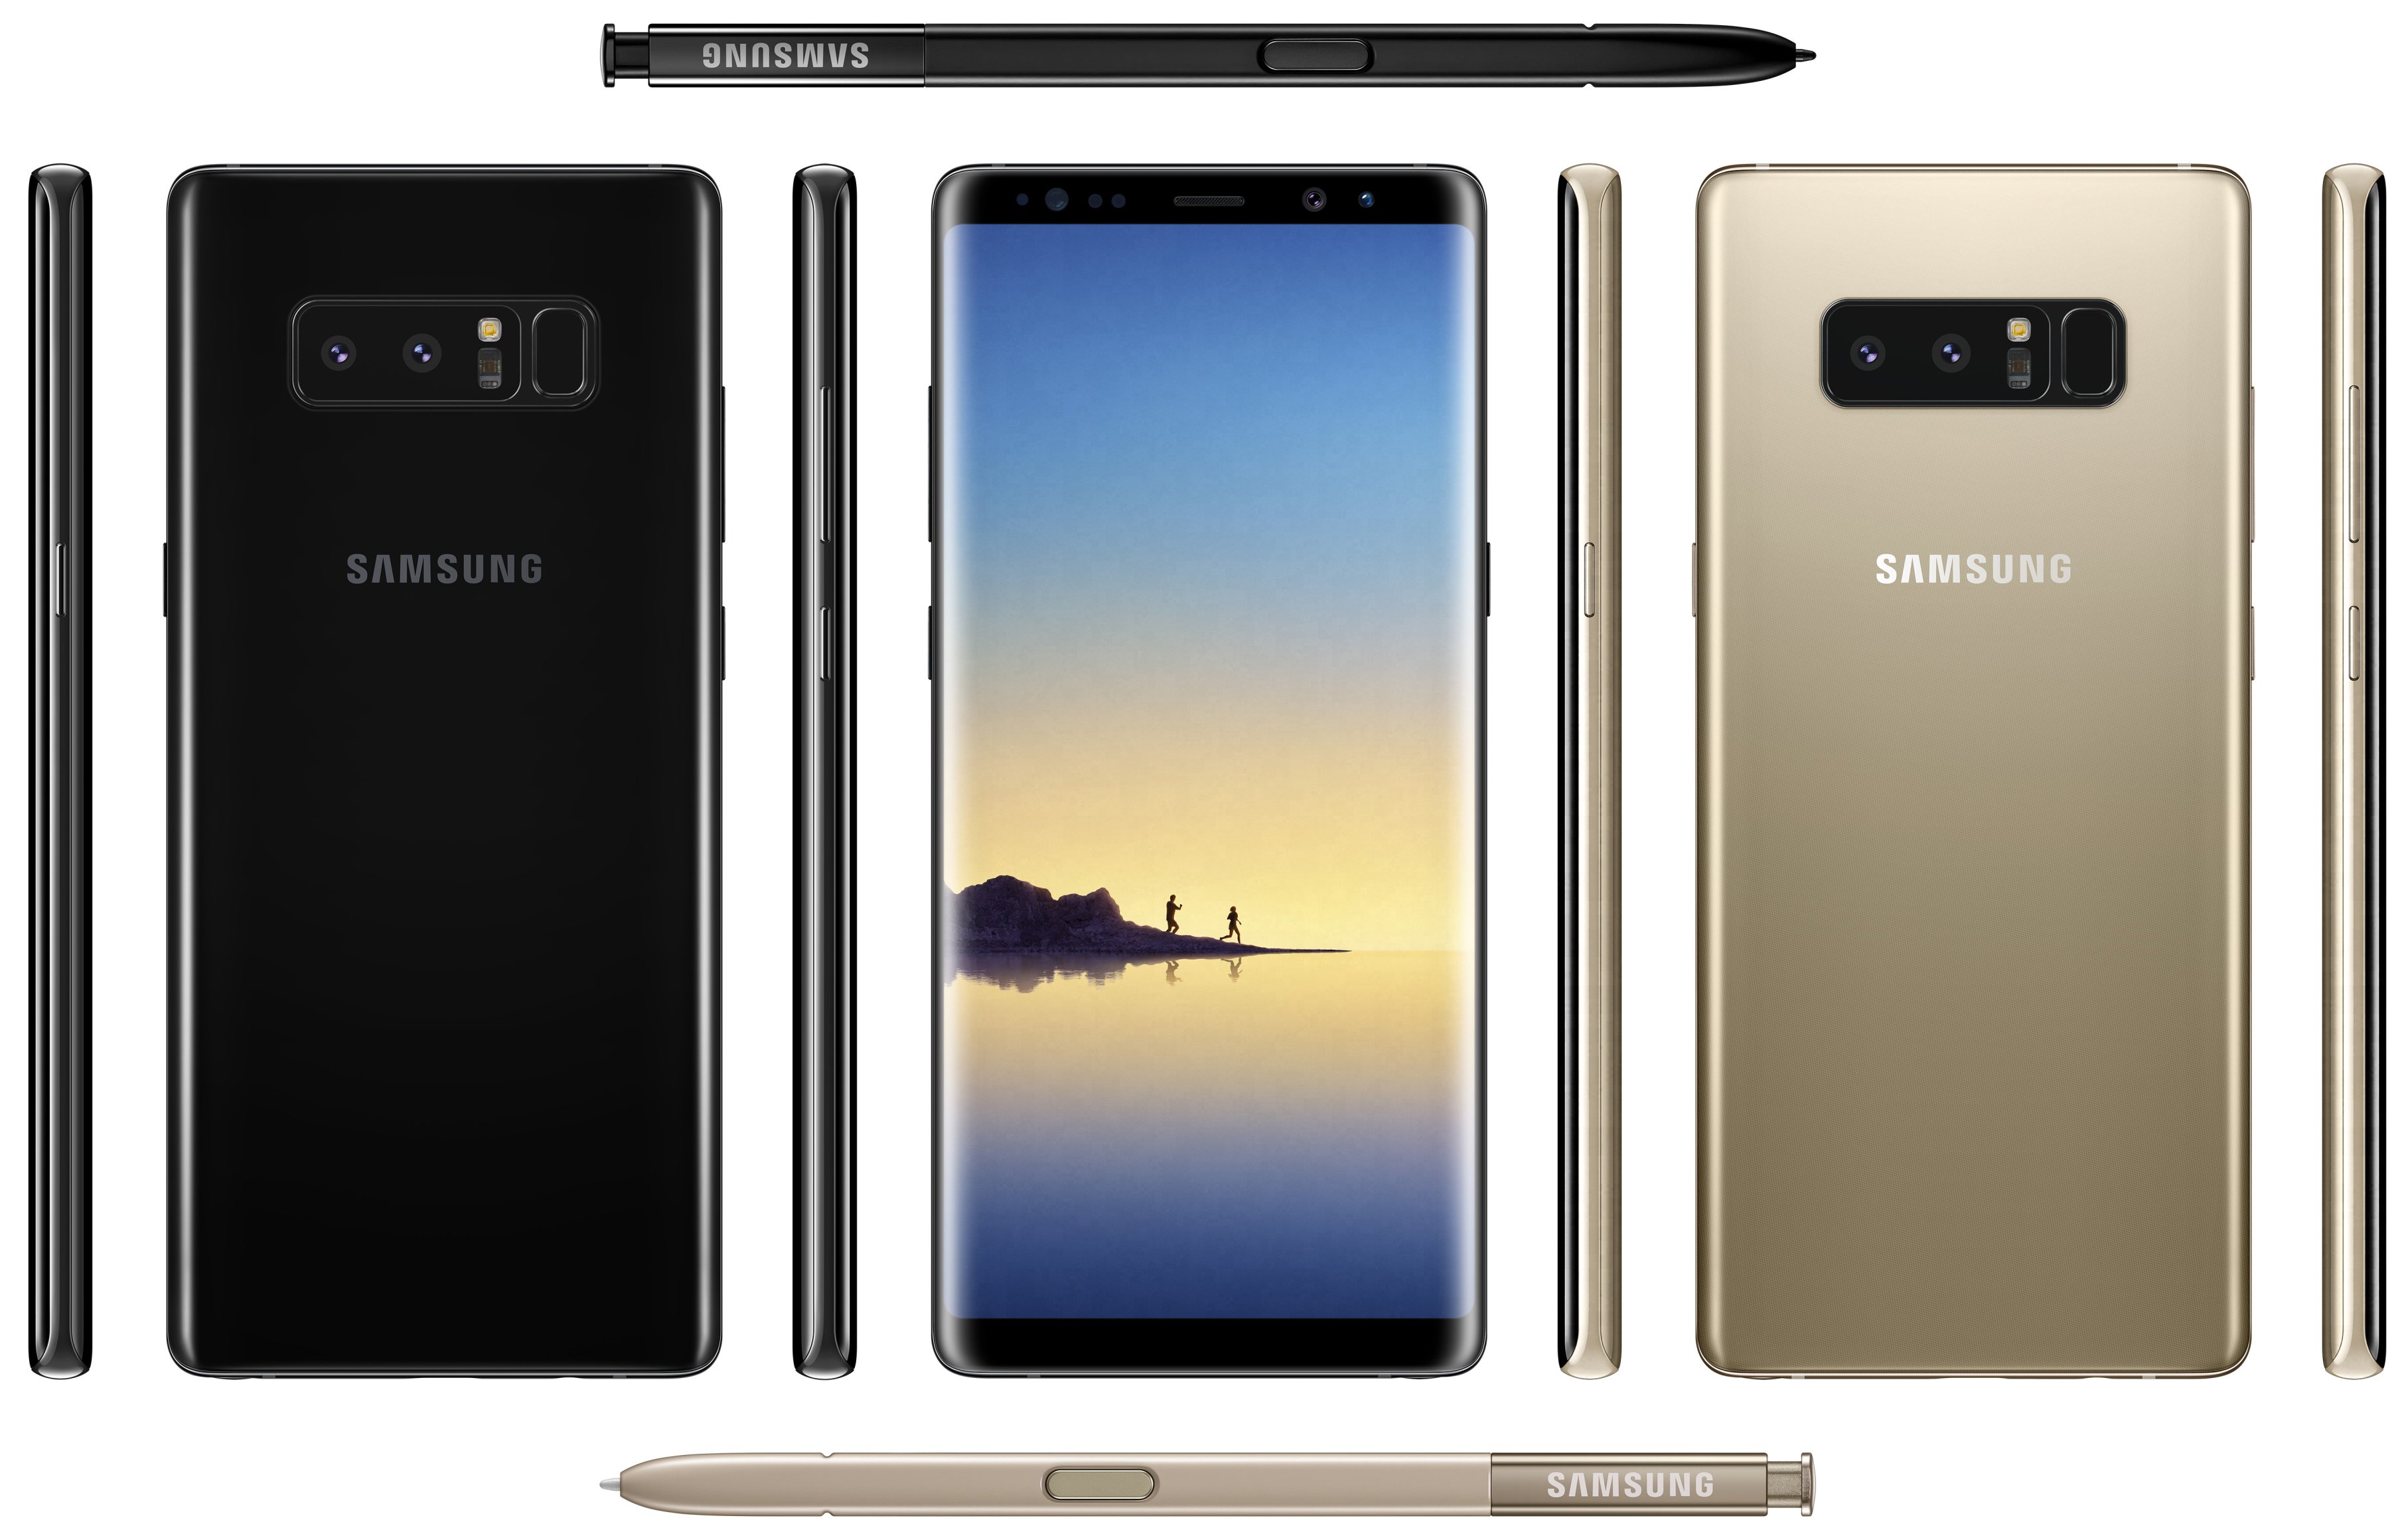 Here's an early look at the Samsung Galaxy Note 8 | TechCrunch